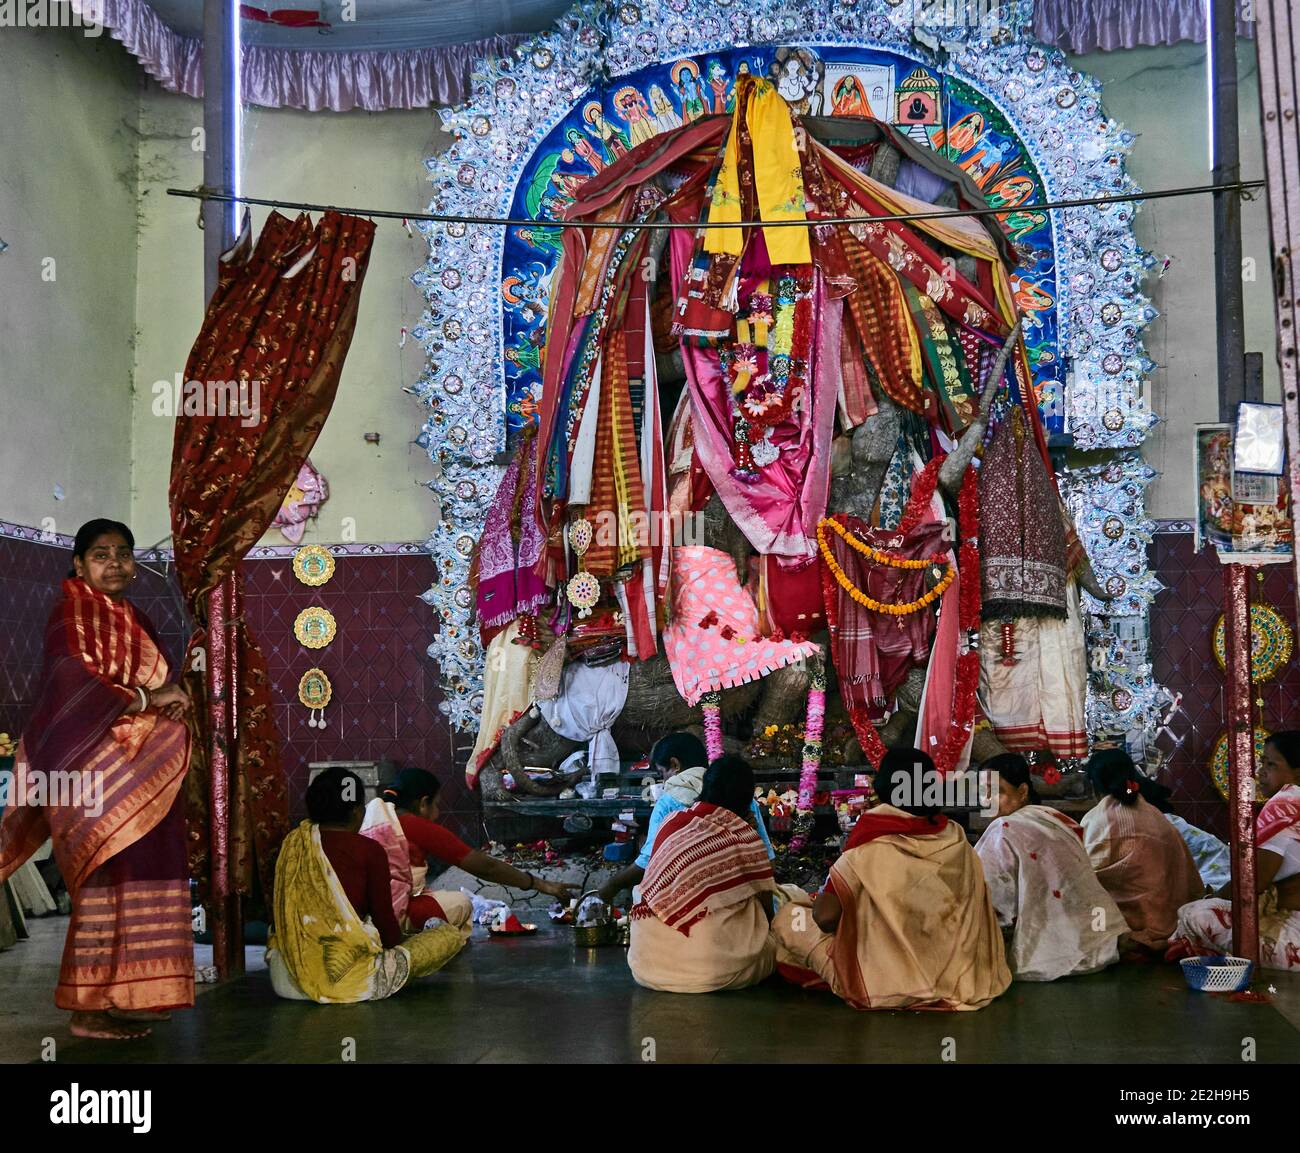 Kalna City, West Bengal, India. The faithful place offerings before alta to Durga, the Hindu deity in Kalna. The statue is covered with colored fabric Stock Photo